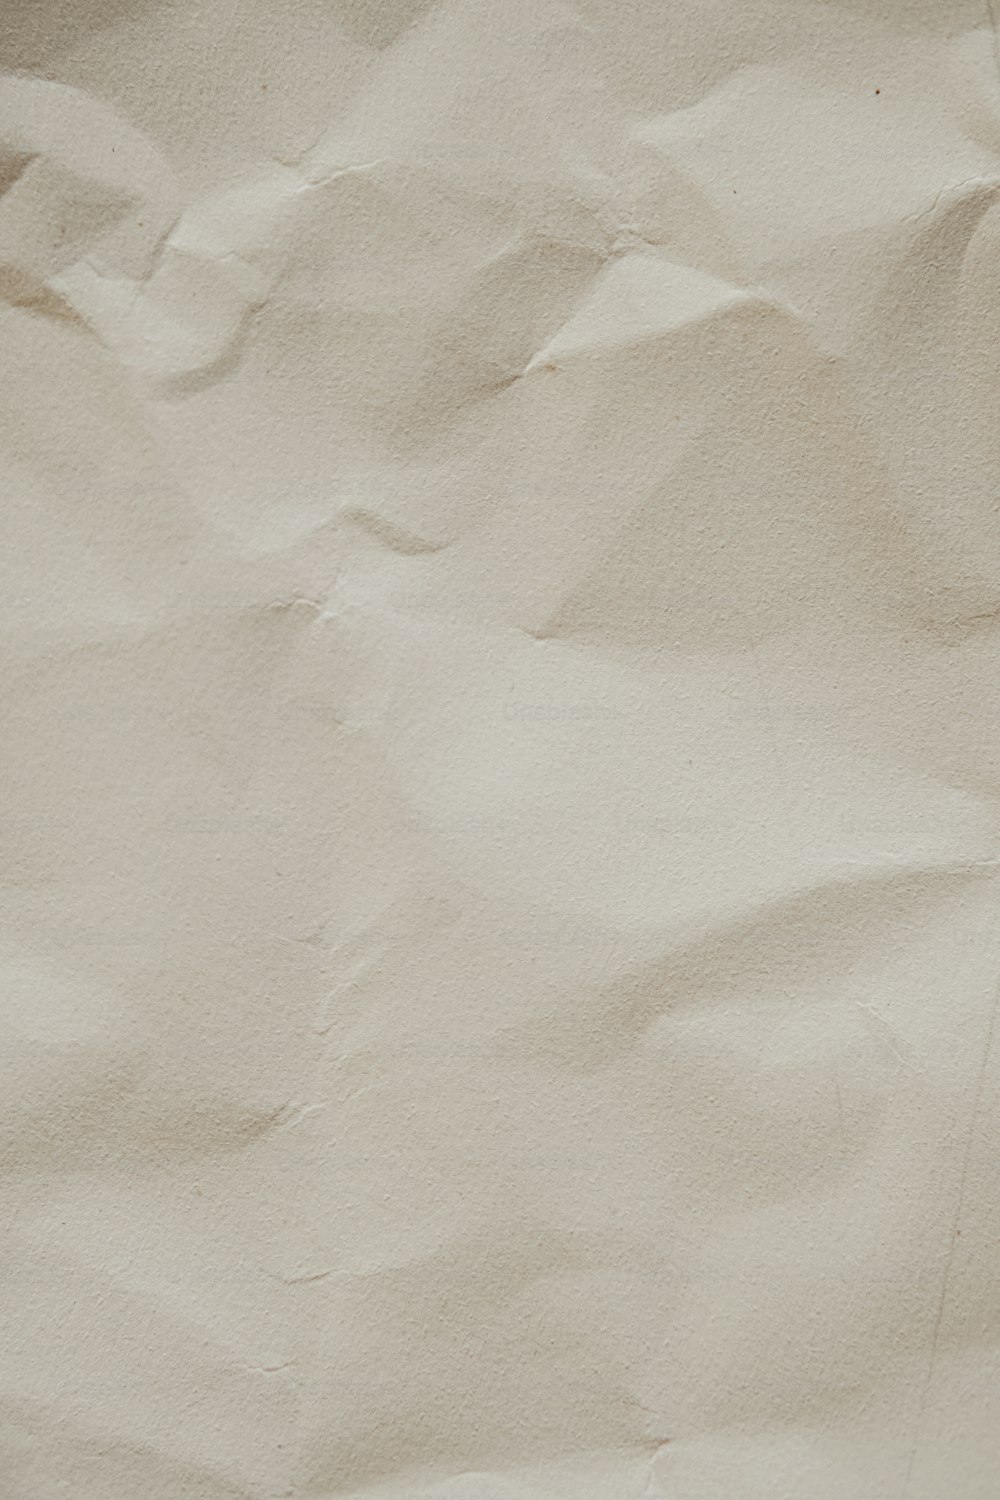 Old Paper Texture. Vintage Paper Background Or Texture, Brown Paper Texture  Stock Photo, Picture and Royalty Free Image. Image 130680068.